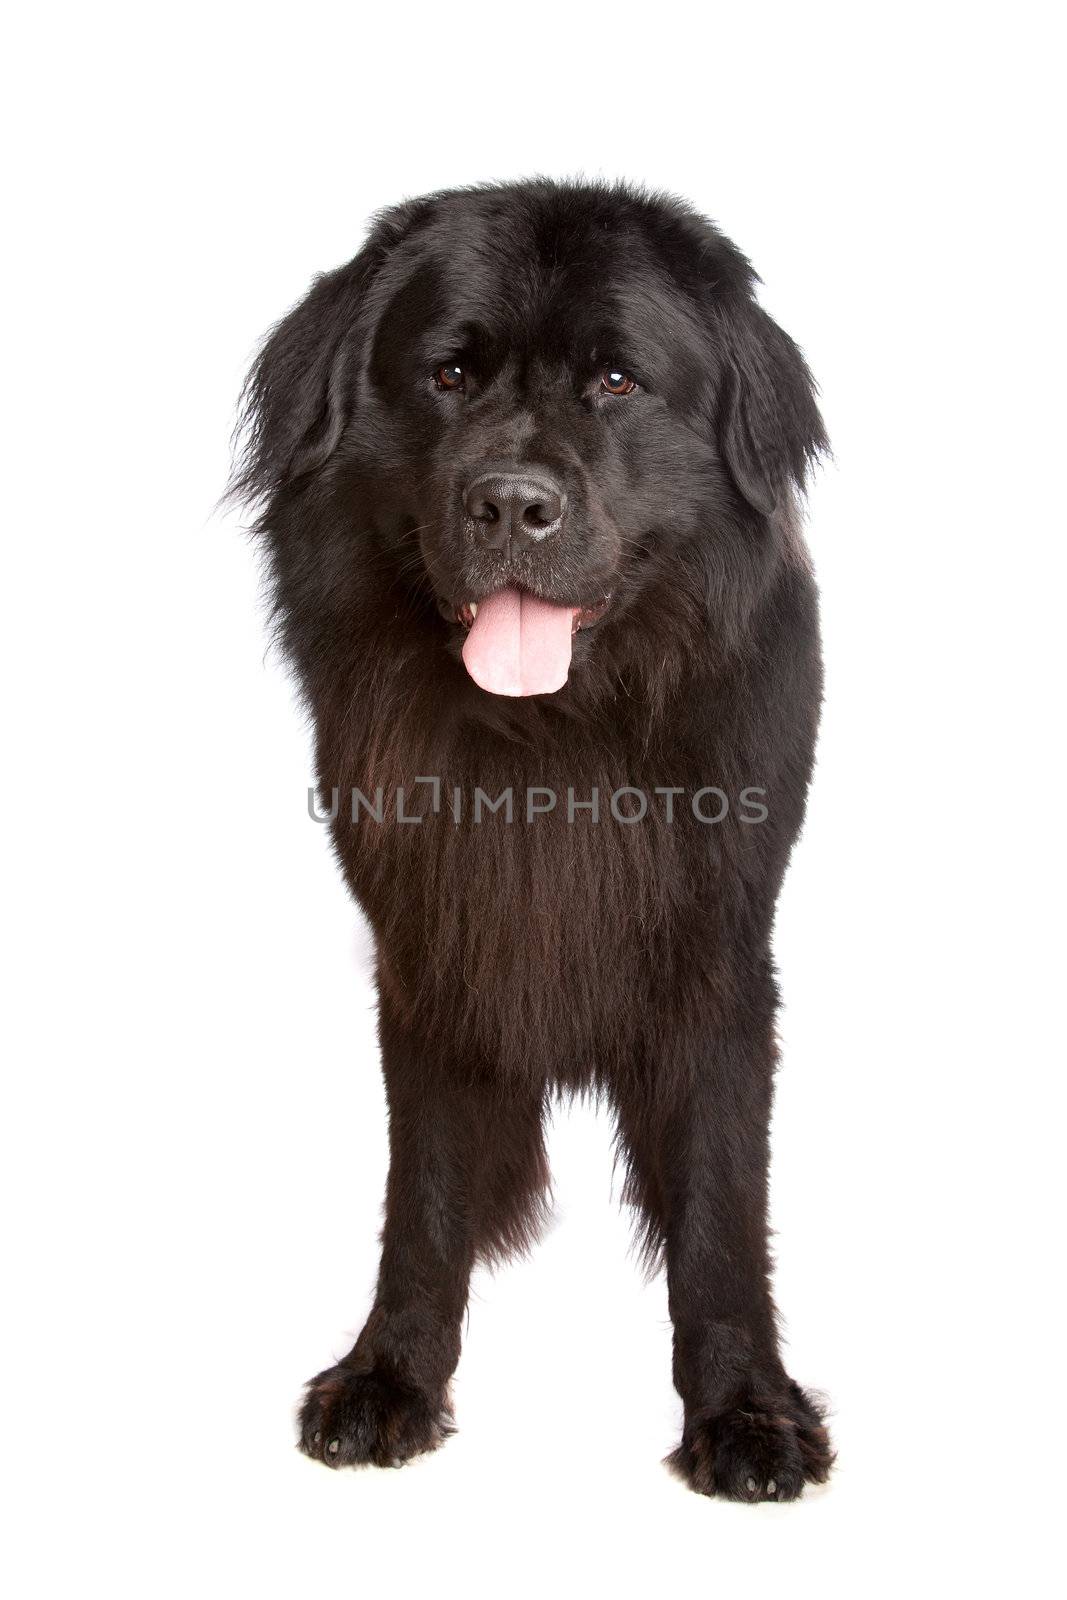 Newfoundland dog in front of a white background